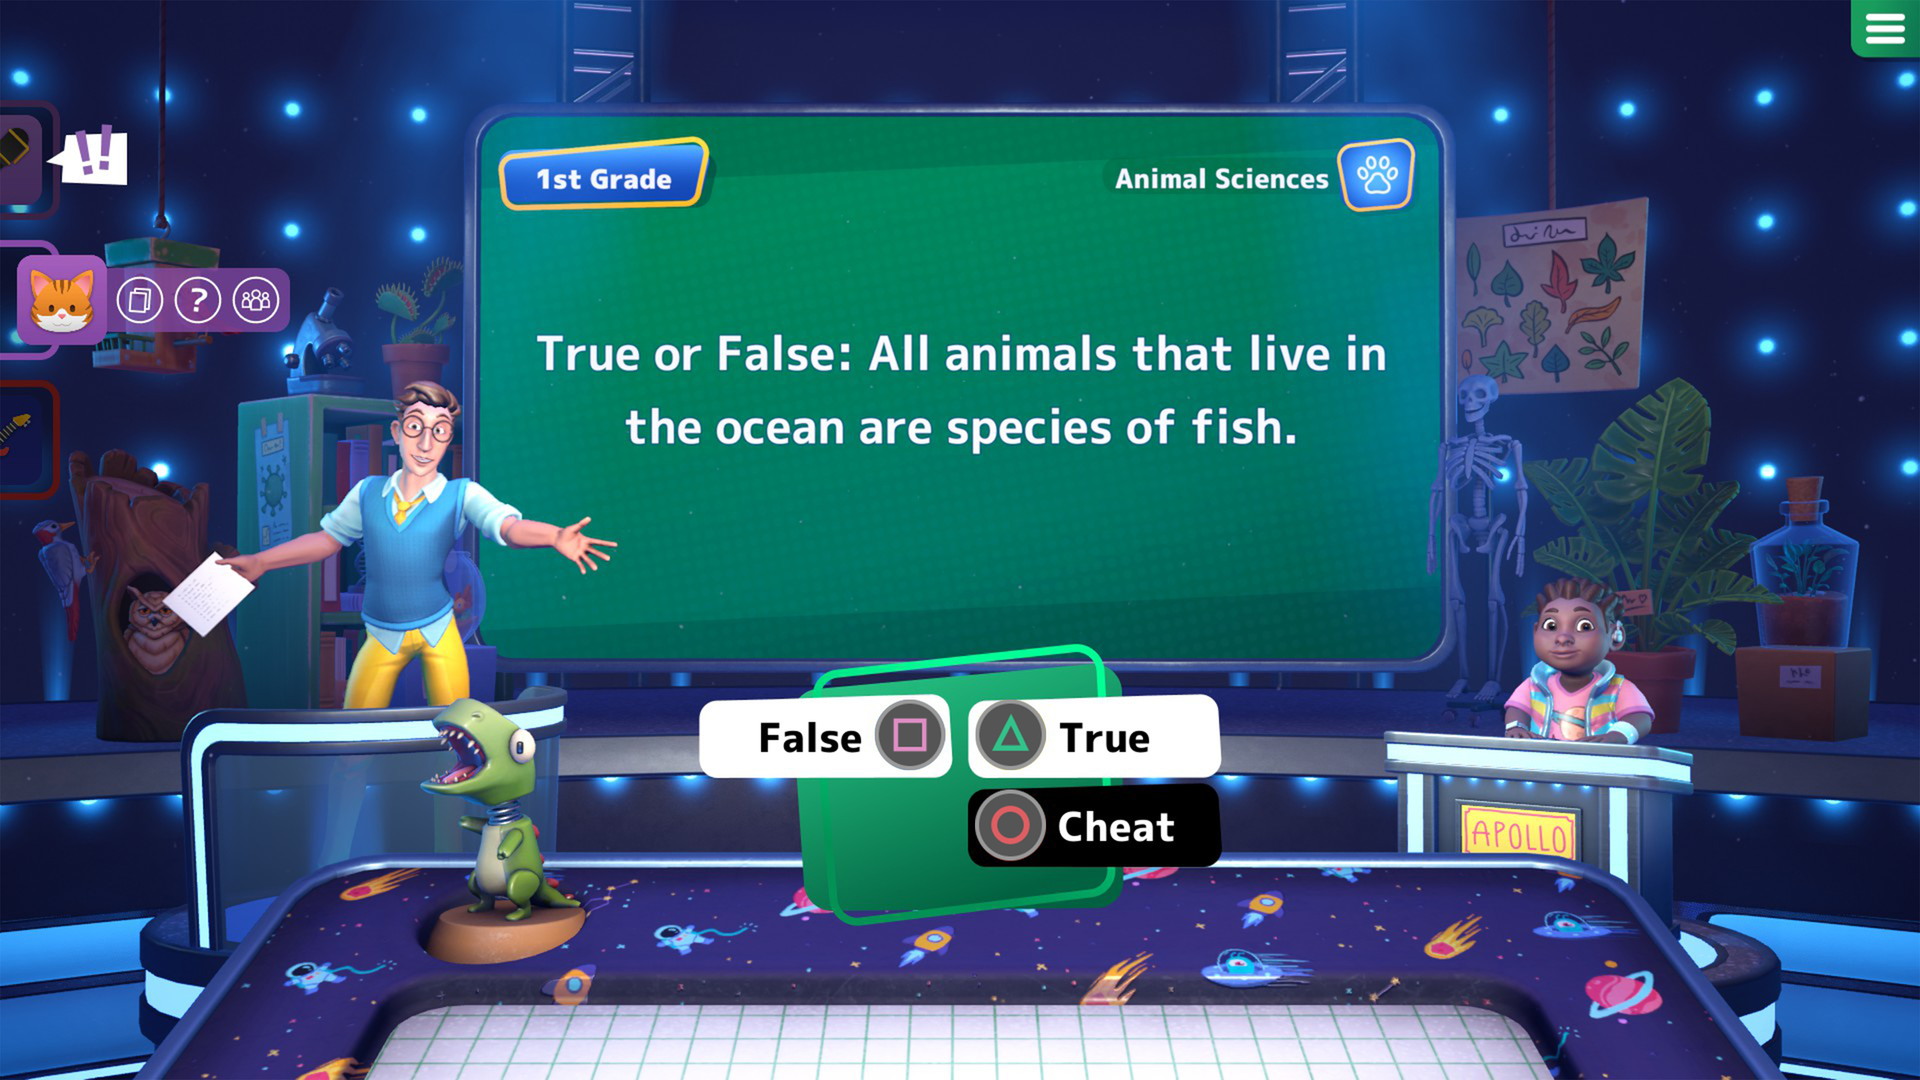 Are You Smarter Than A 5th Grader? - screenshot 3